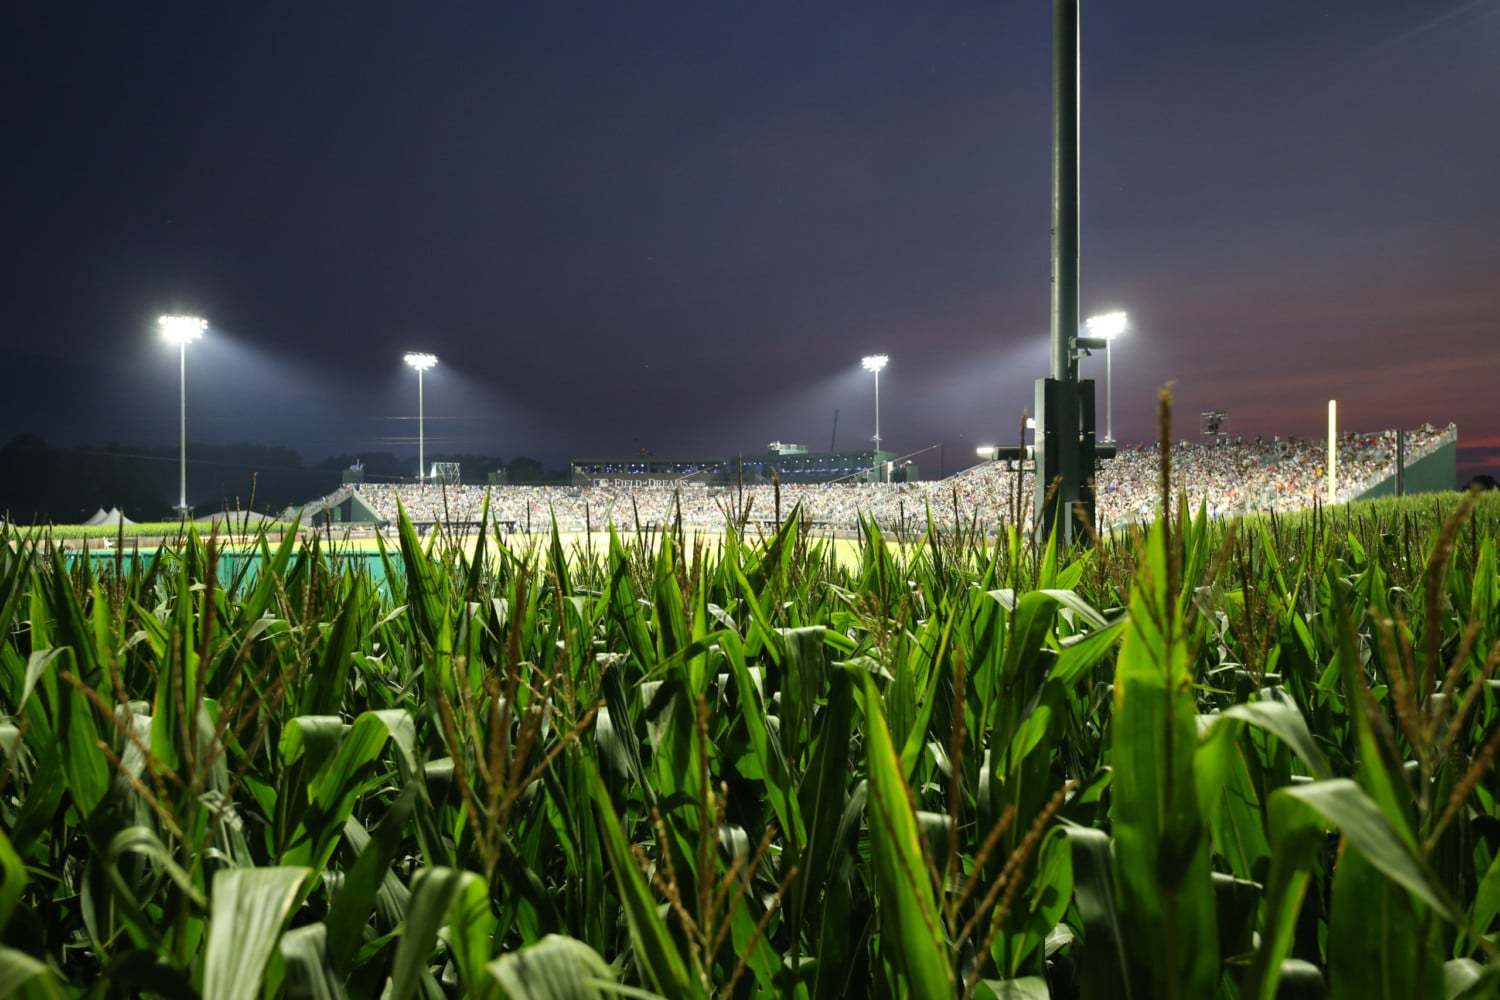 With one year to make it happen, Field of Dreams will create new field for  MLB game